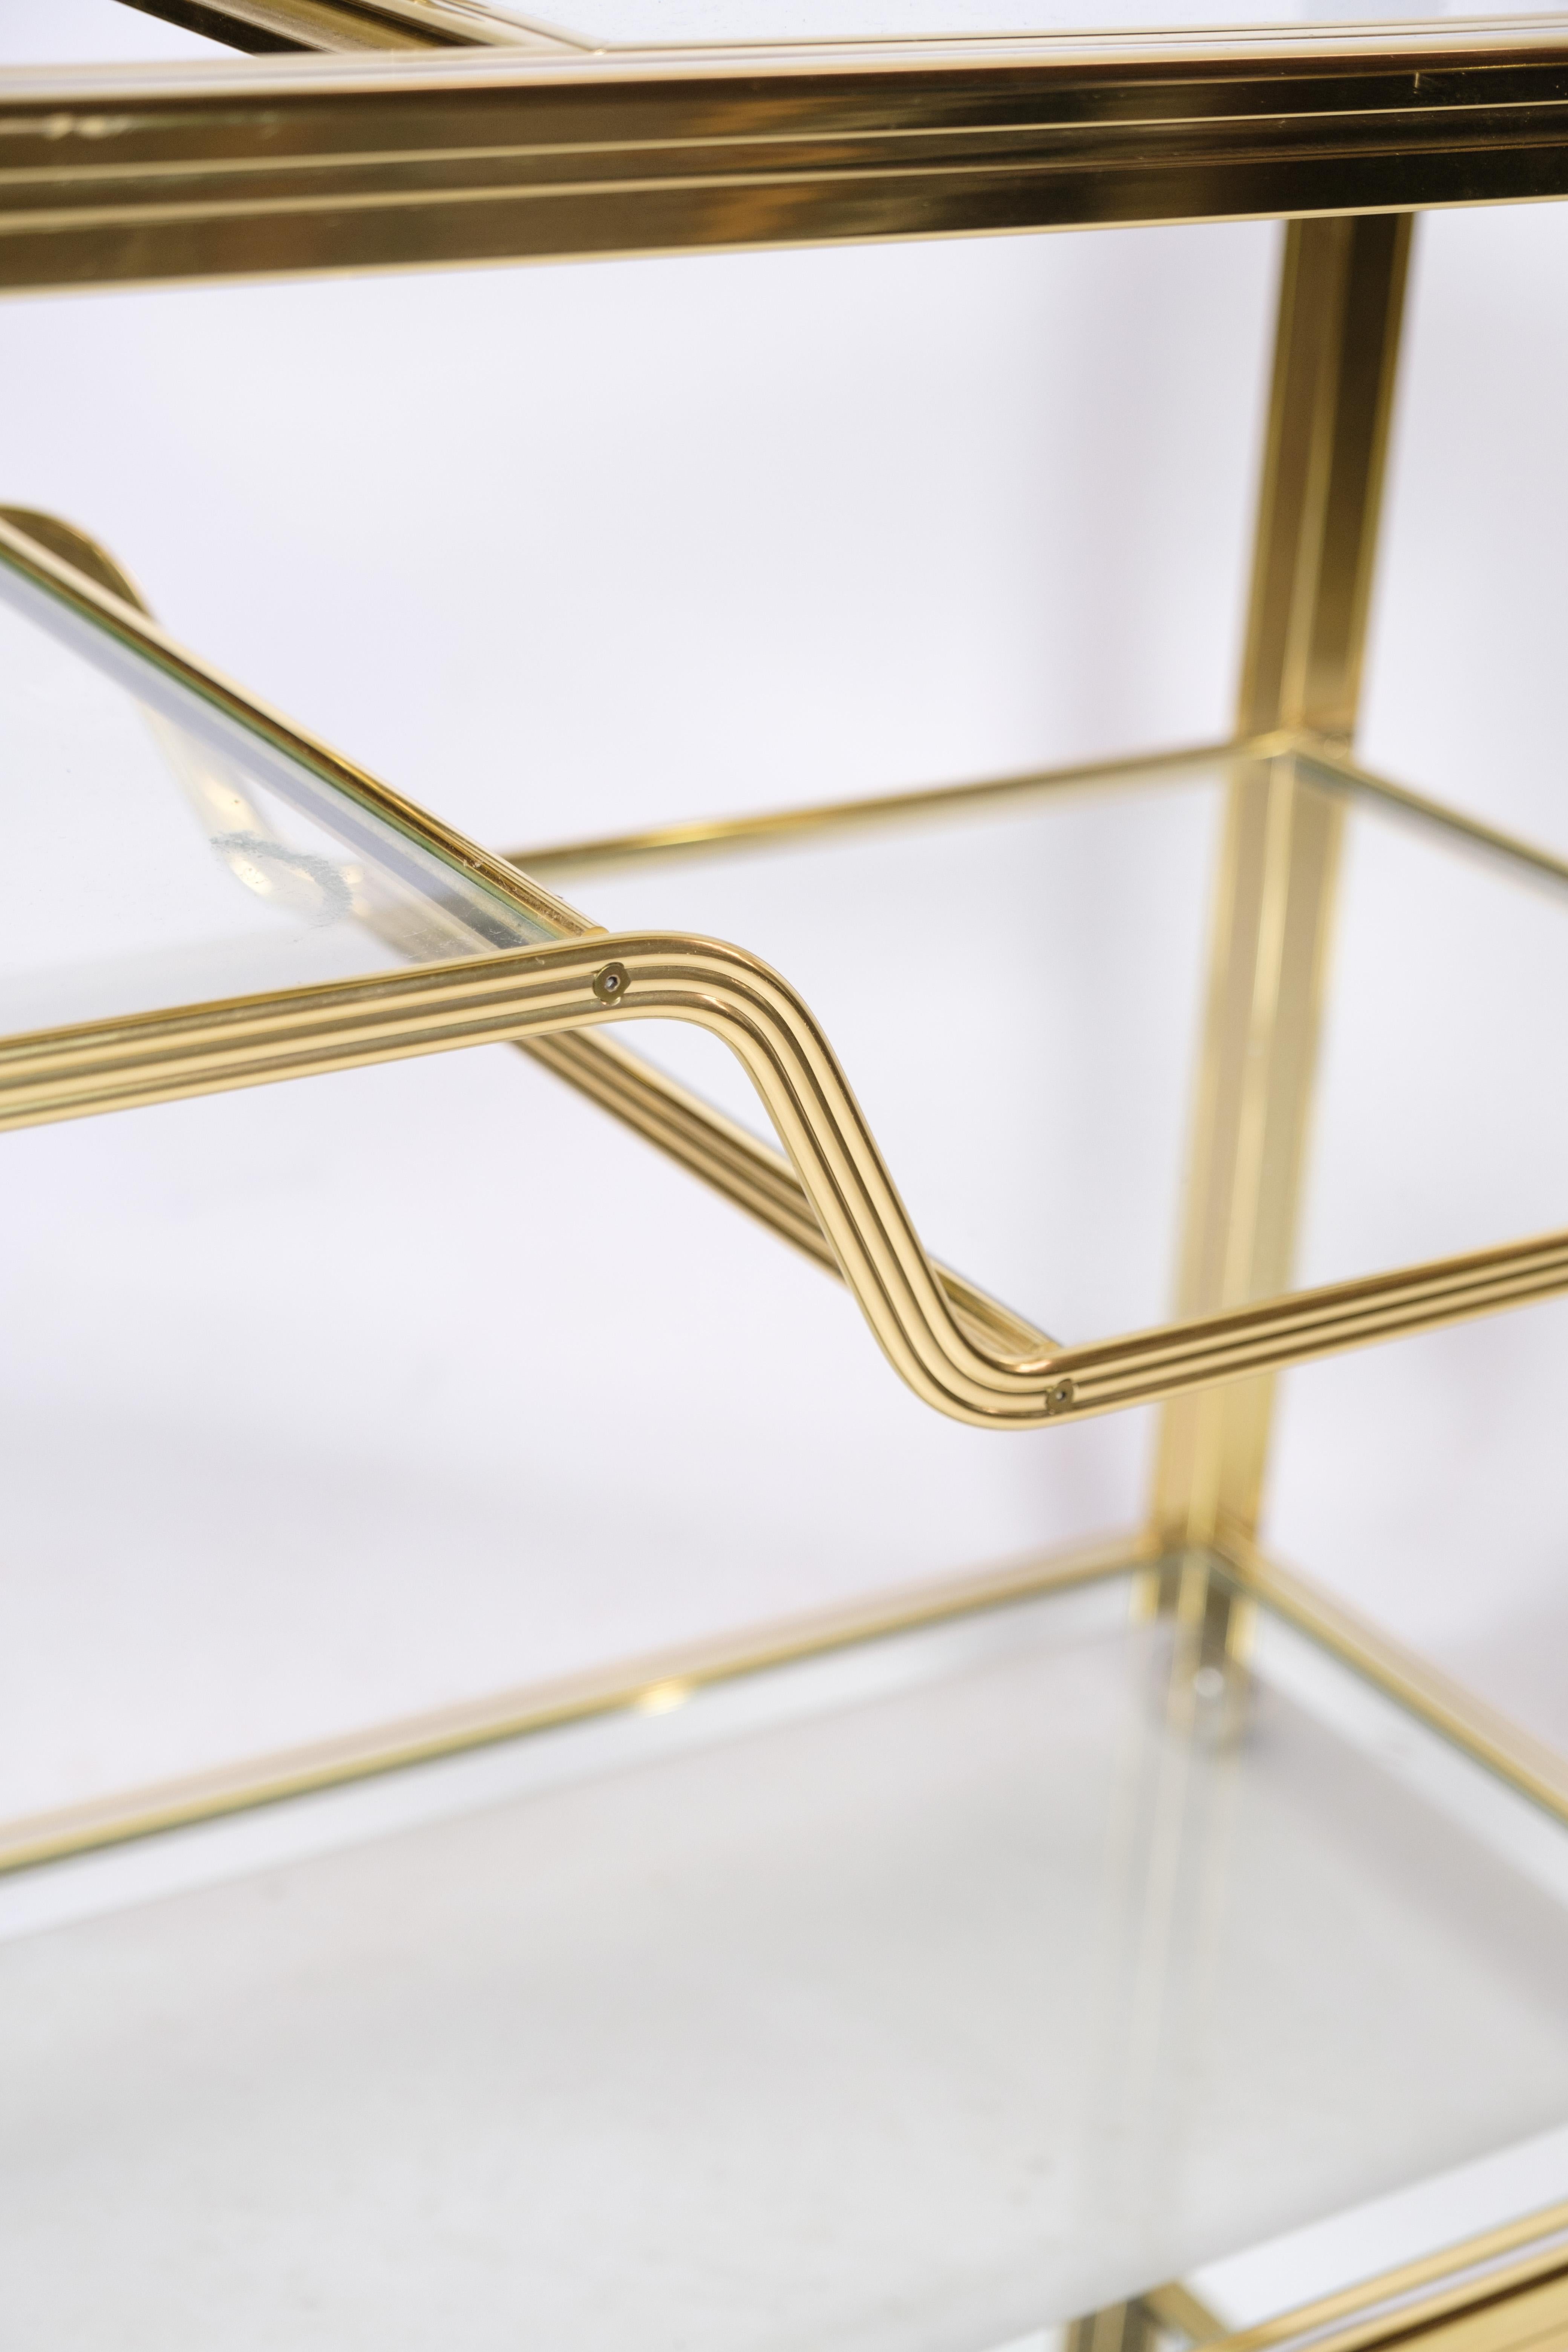 Pierre Vandel bar with castors, a stunning and distinctive piece of furniture that seamlessly combines functionality with style. Its split-level design offers generous storage and display space, while the elegant gold and chrome finish adds a touch